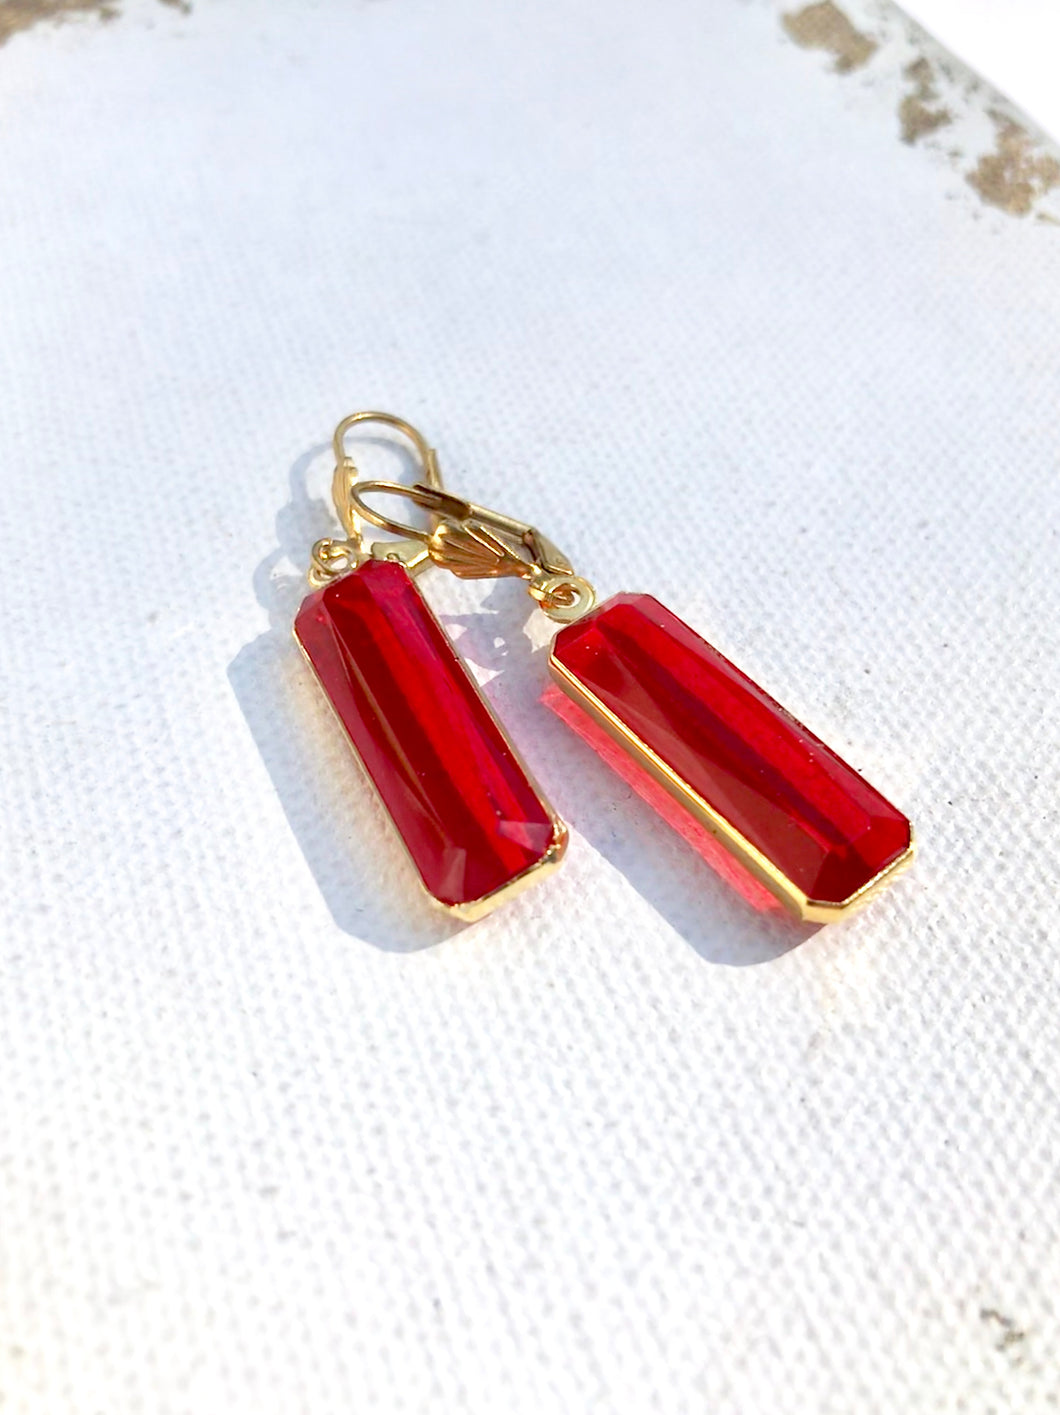 Large Red Glass Drop Earrings, Bright Red Gem & Gold Tone Dangle Earrings